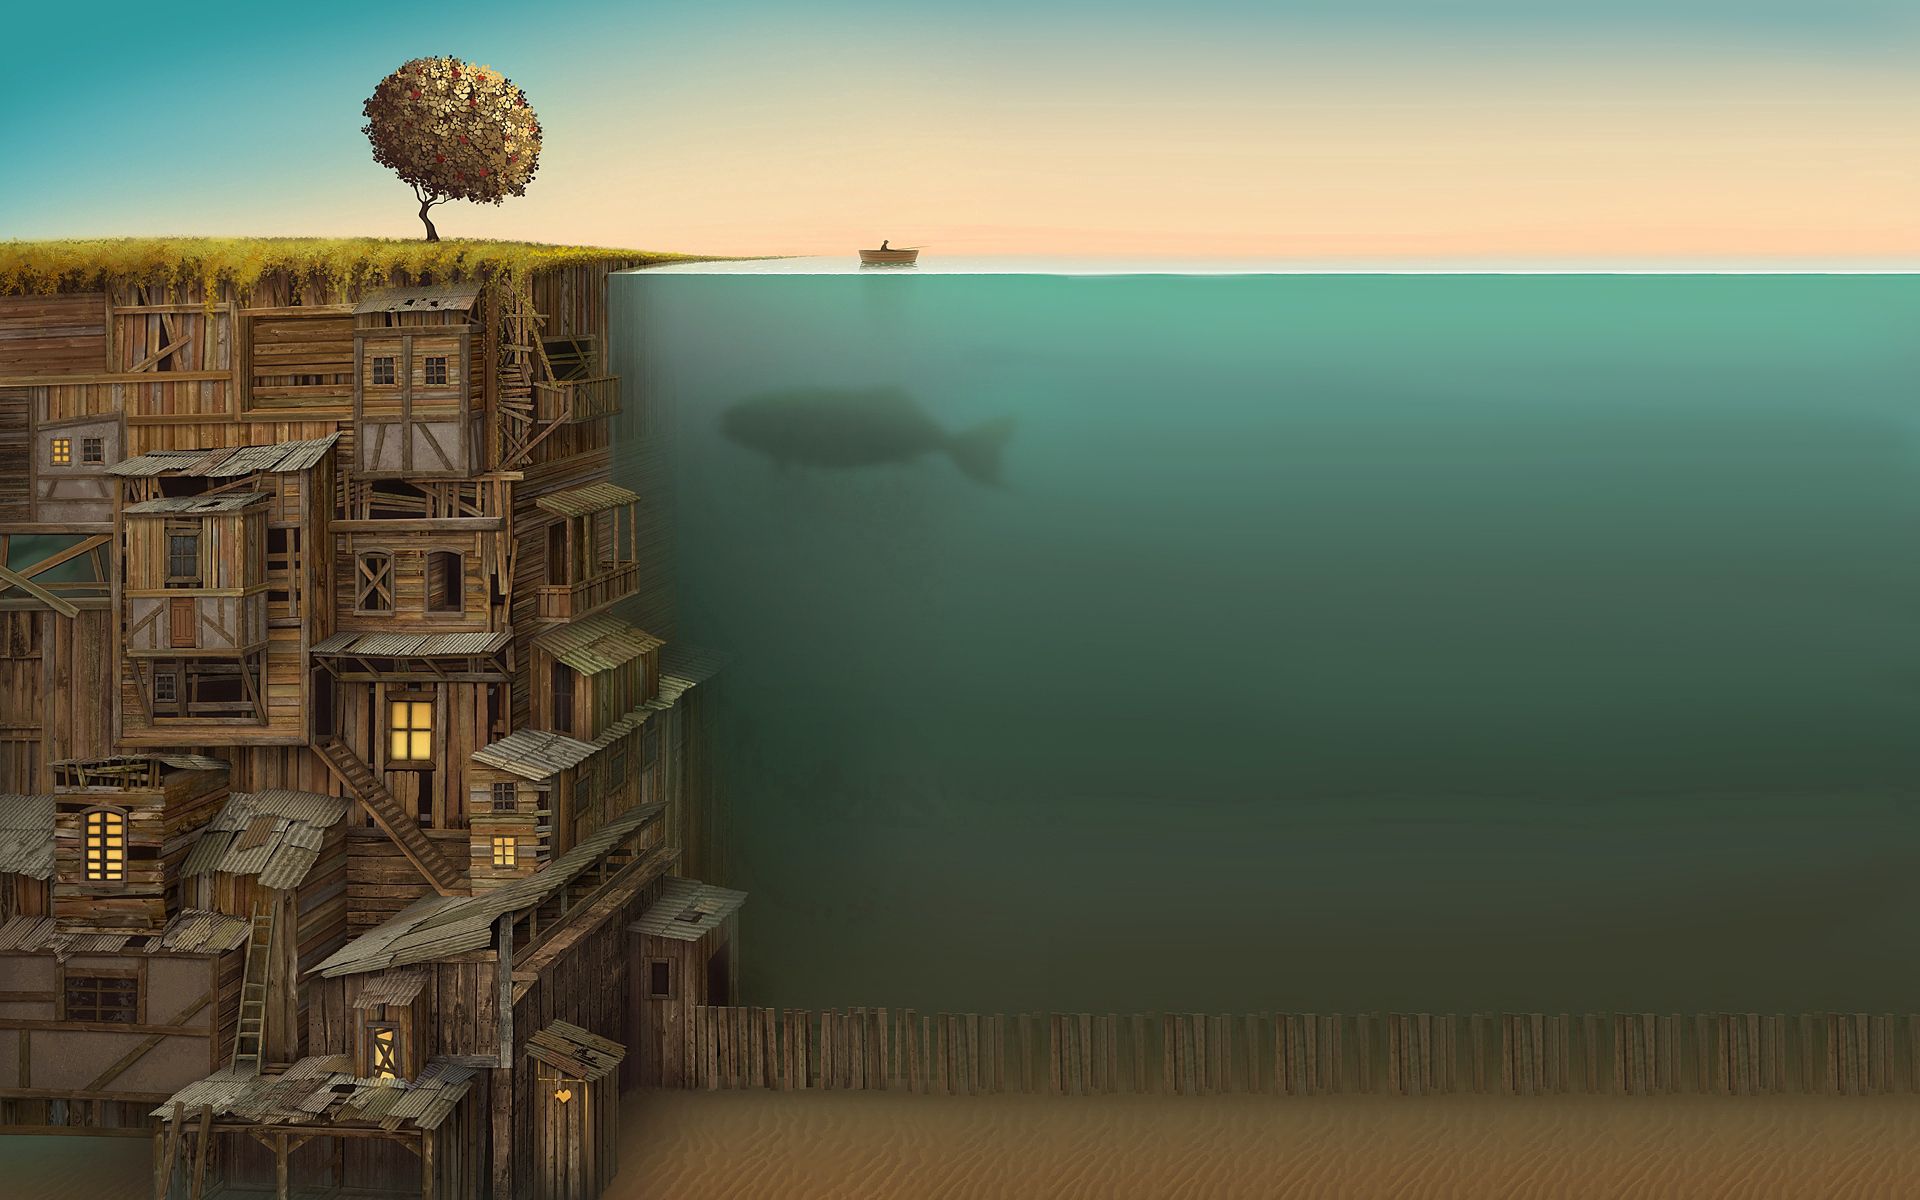 140572 download wallpaper art, wood, tree, house, multi-storey, multistory, whale, under water, underwater, improvisation, bottom screensavers and pictures for free